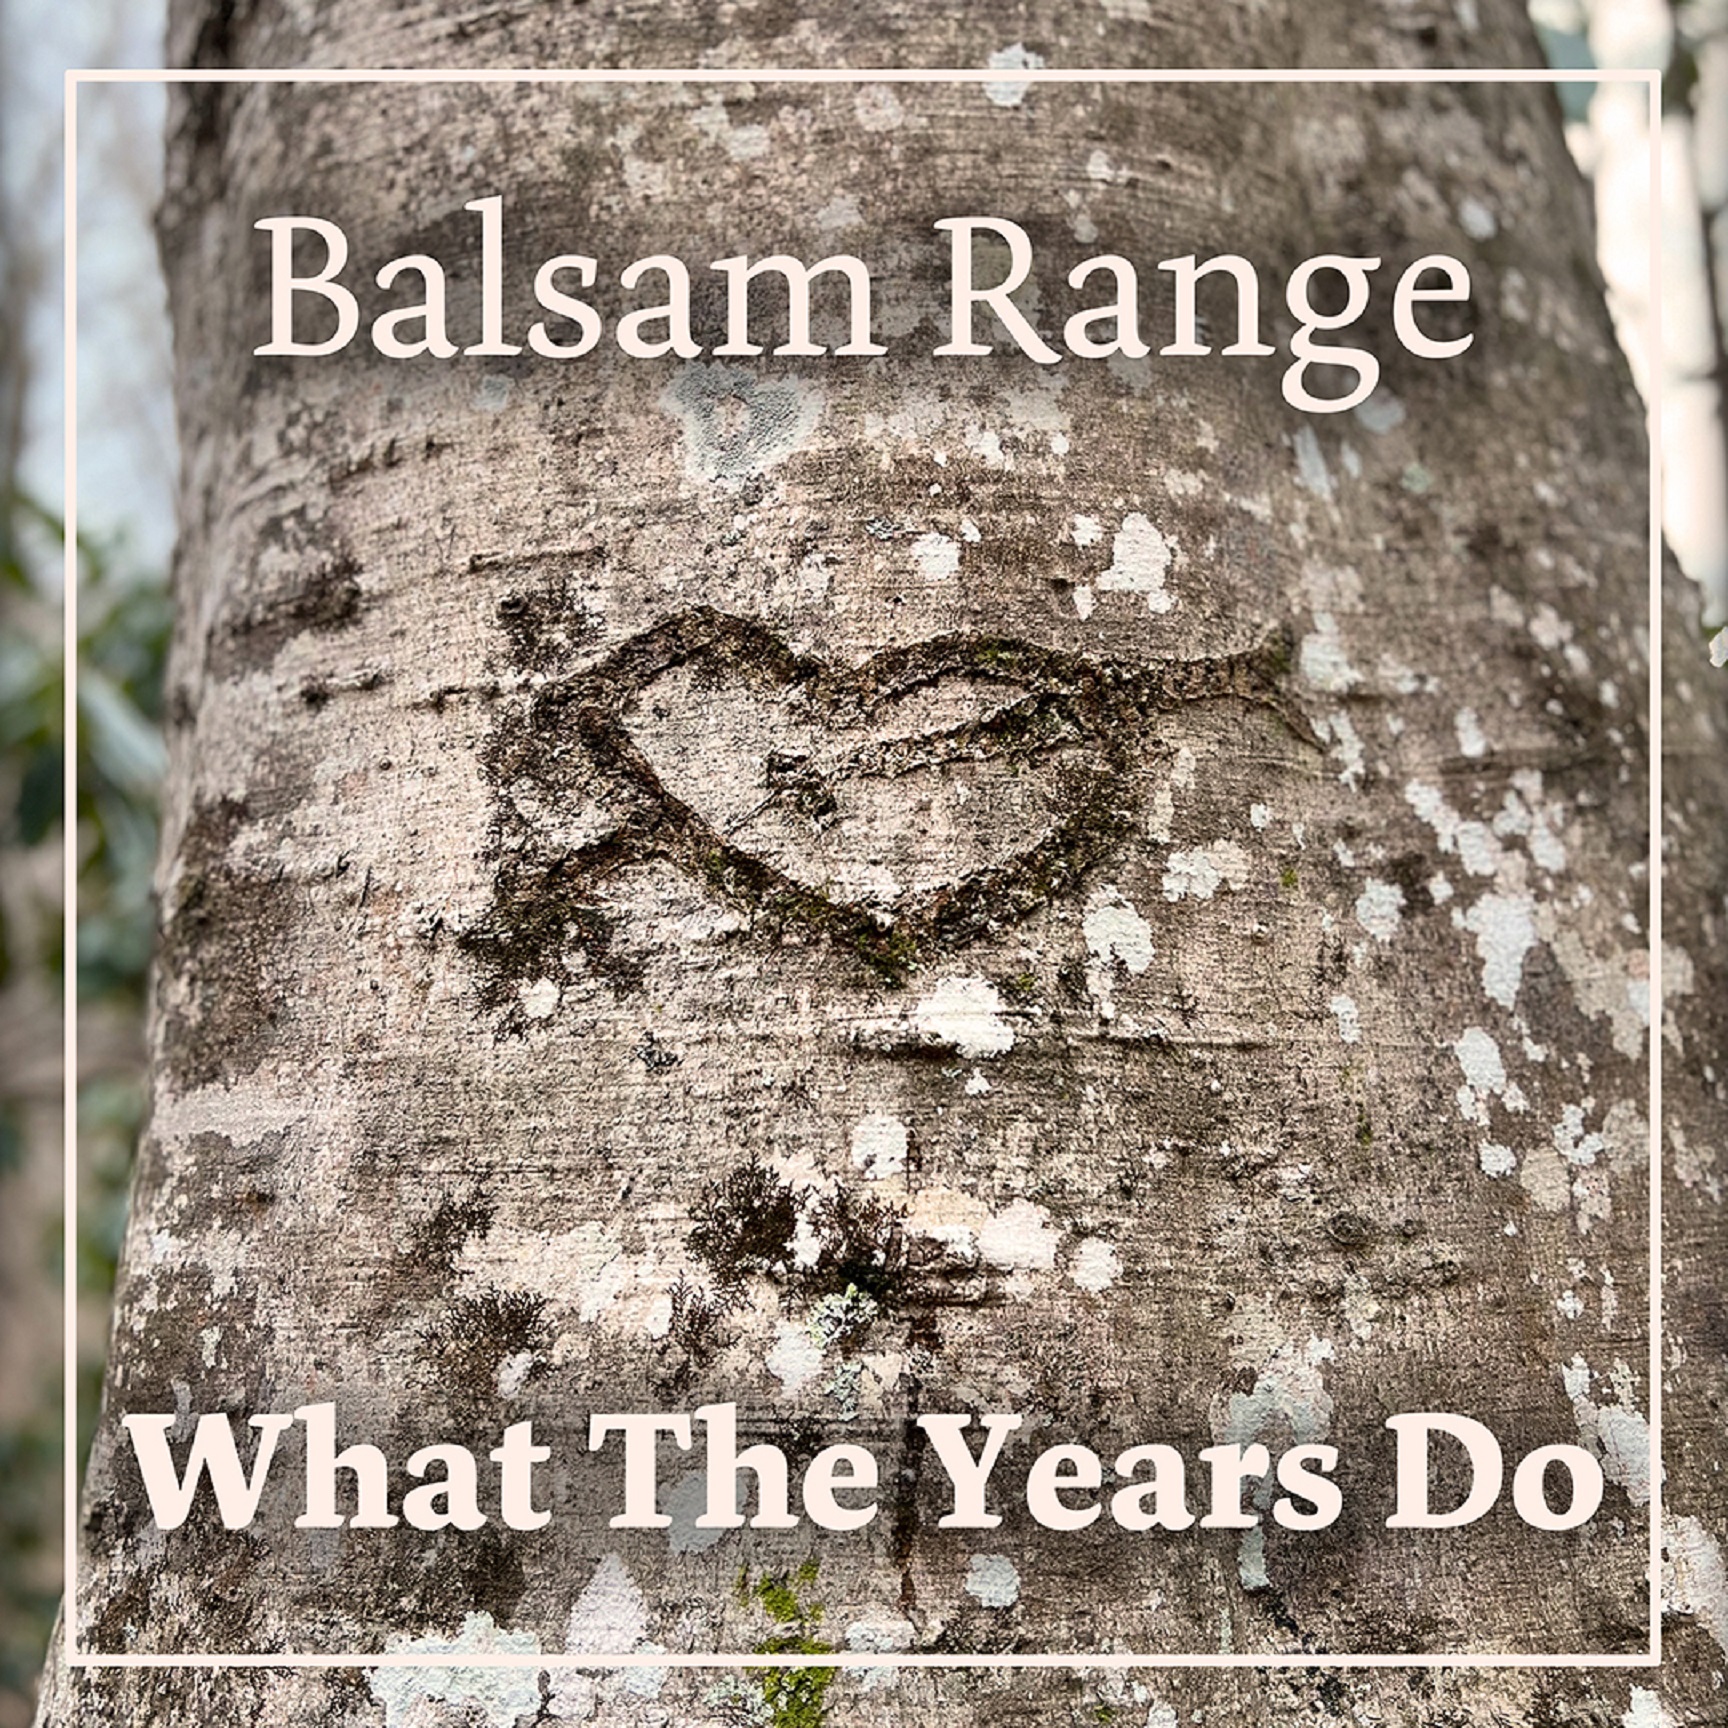 Balsam Range's "What The Years Do" tops monthly bluegrass chart